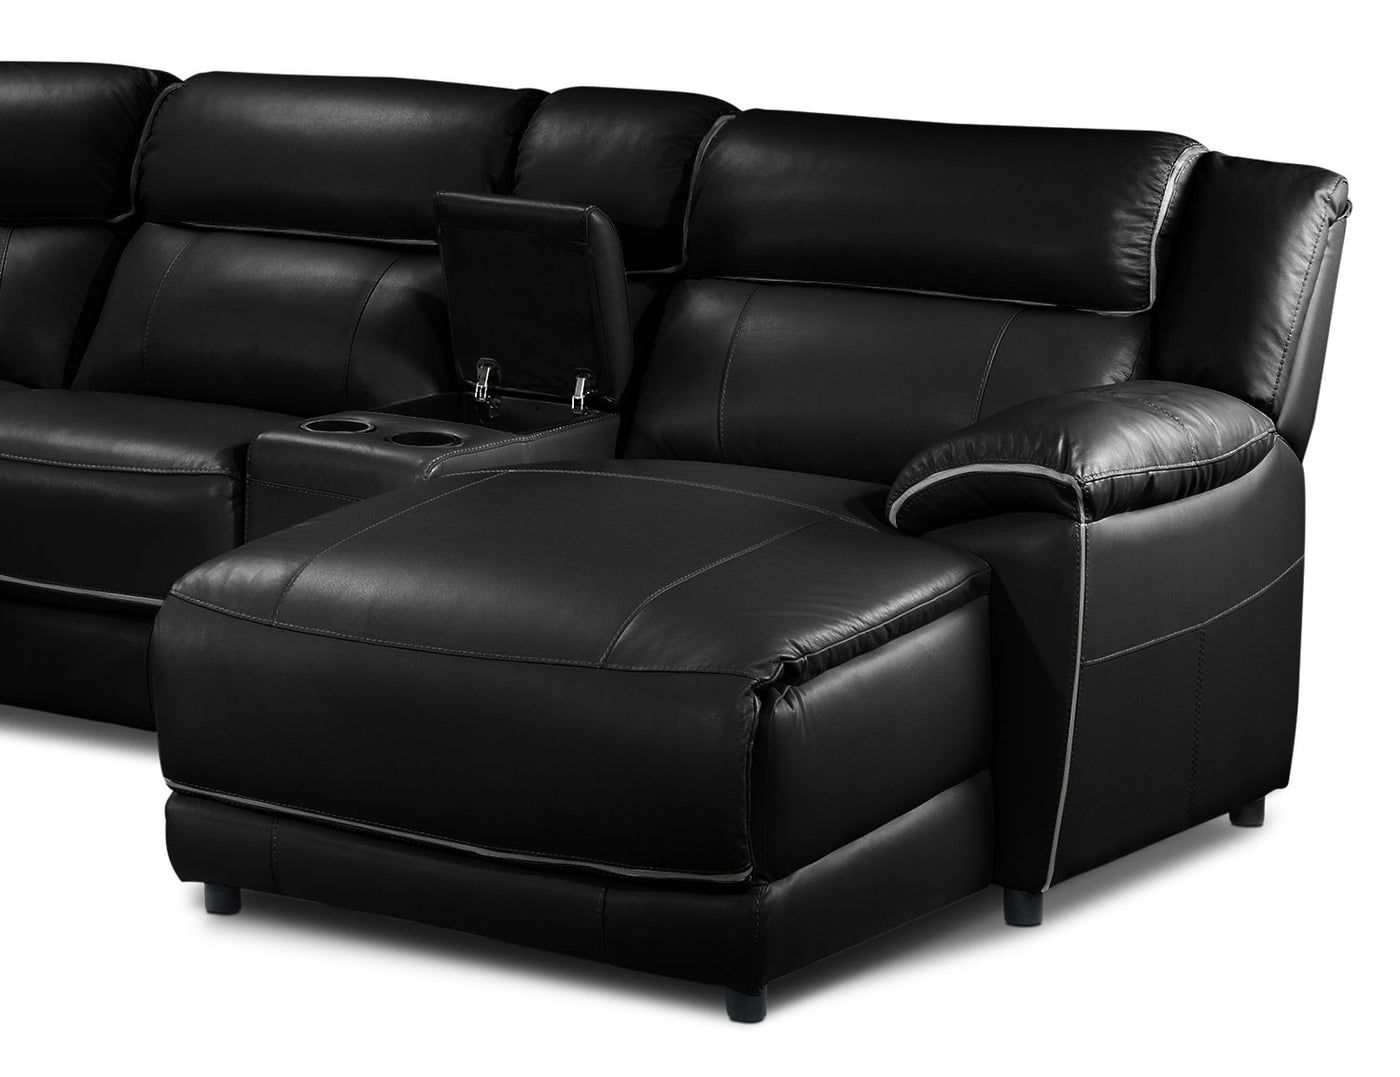 Holton 5 Piece Sectional With Right Facing Chaise – Black | Leon's Inside Right Facing Black Sofas (View 2 of 20)